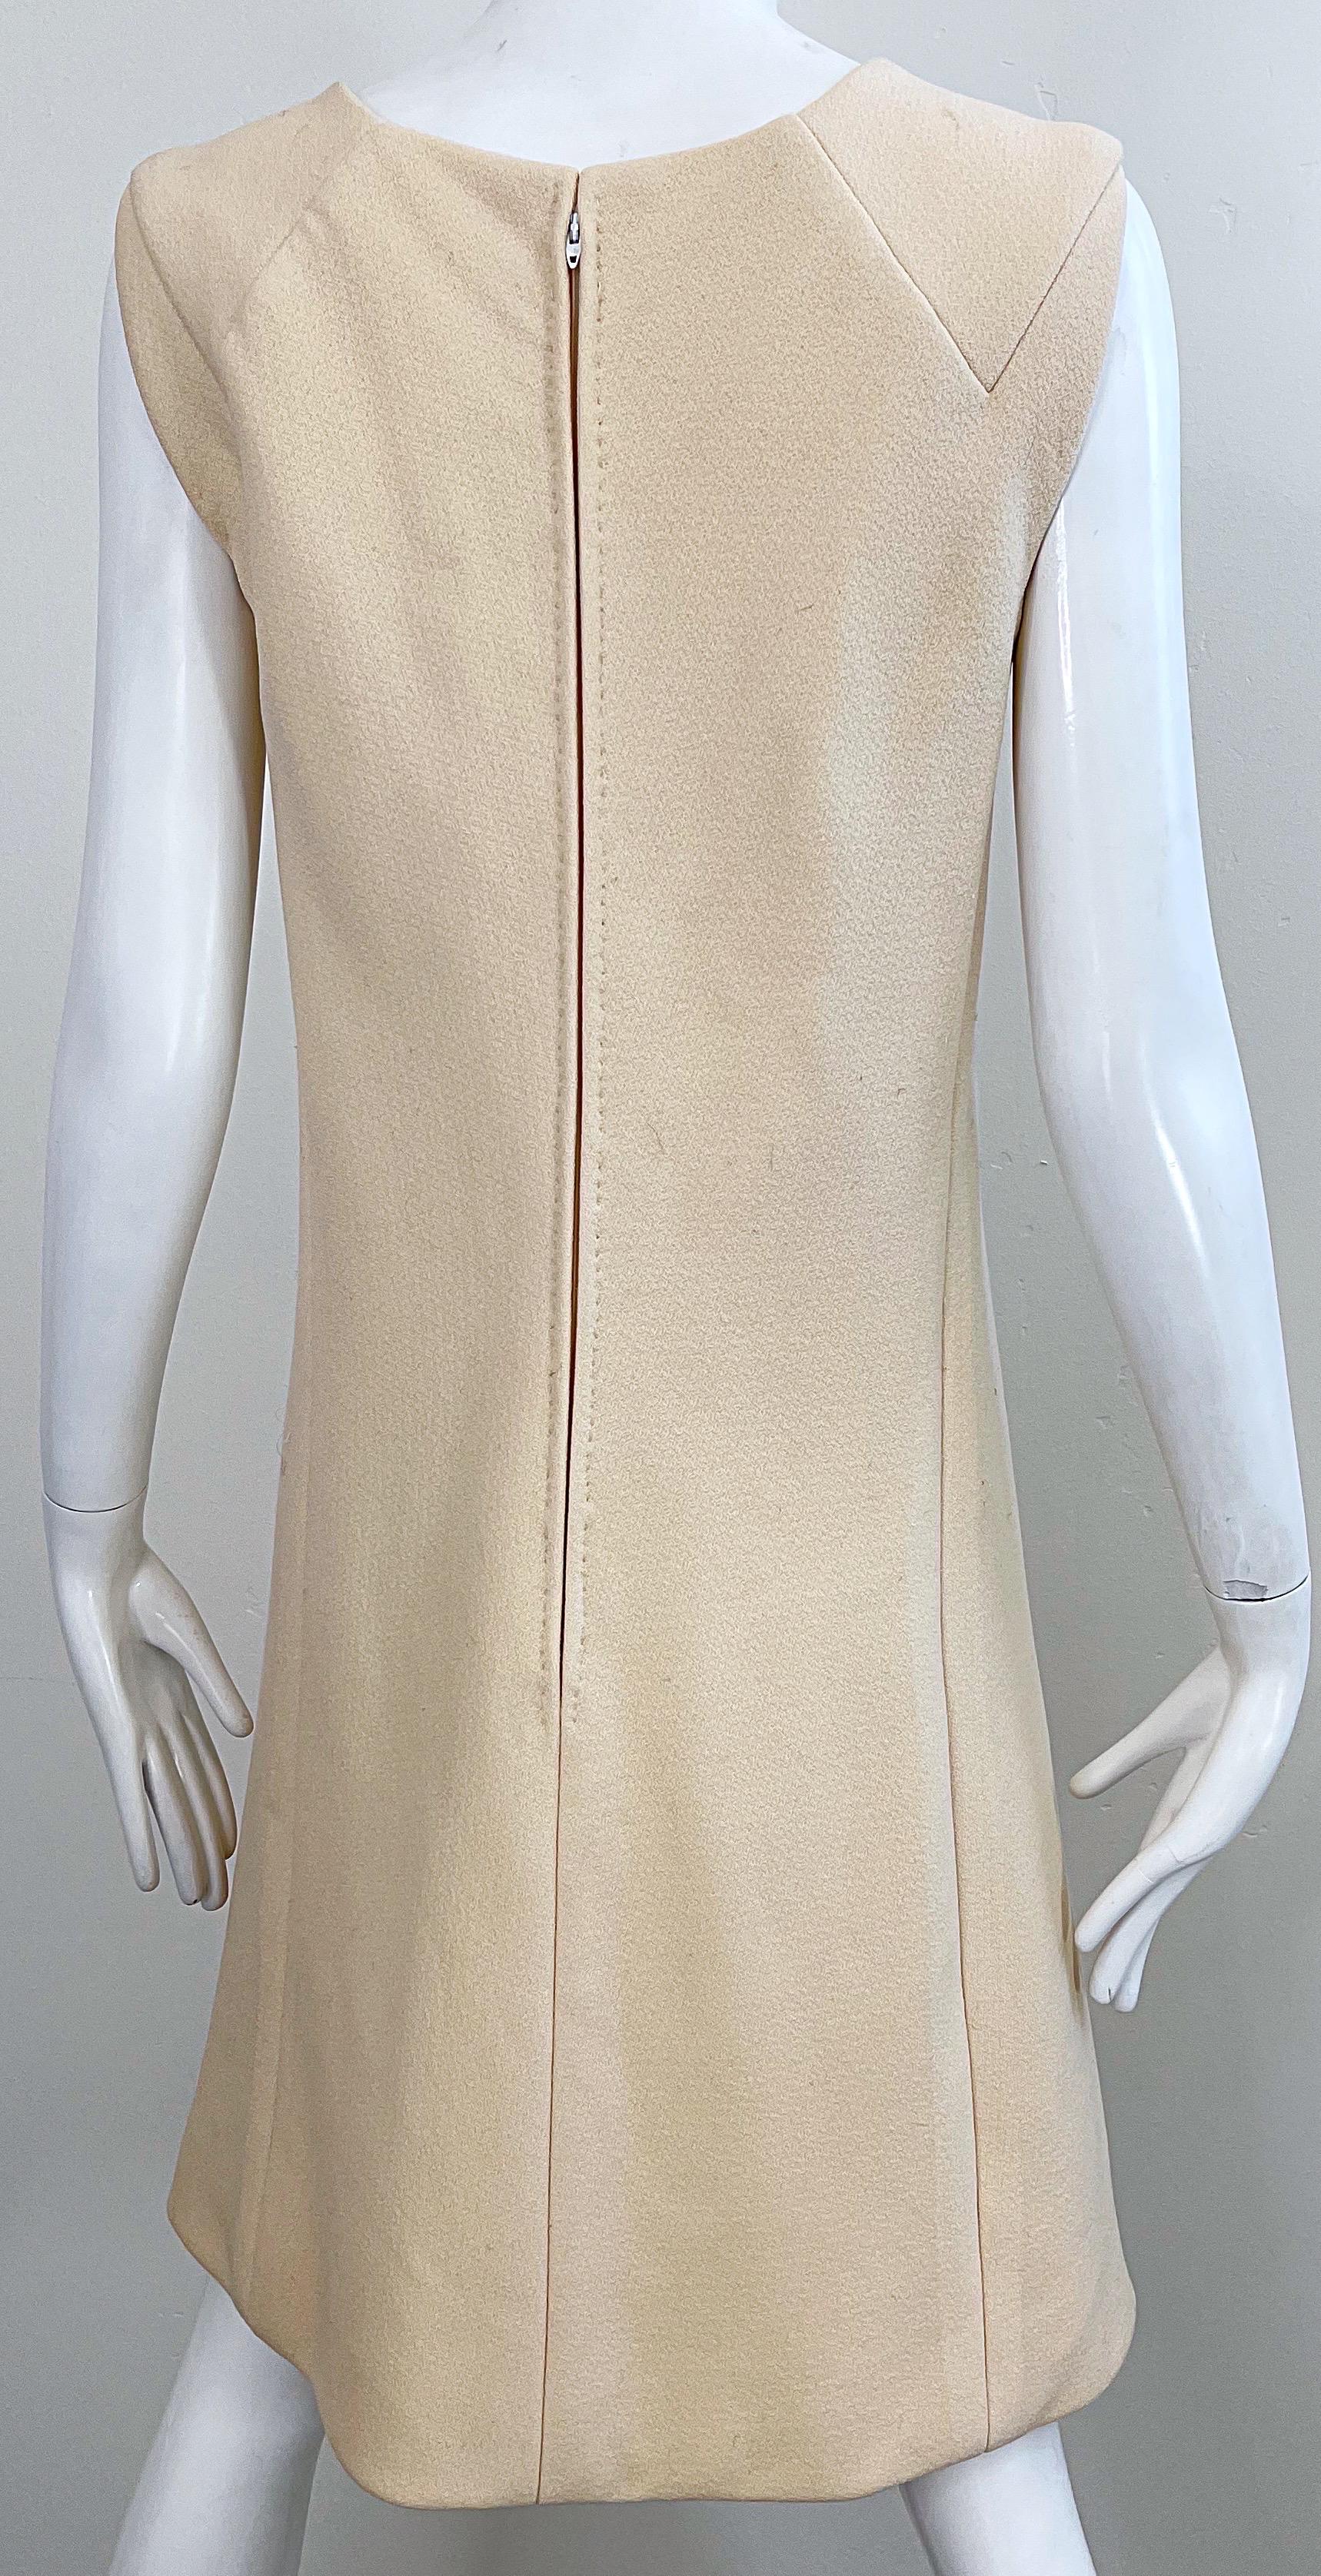 Women's Pauline Trigere 1960s Ivory Off White Sleeveless Vintage Wool A - Line 60s Dress For Sale